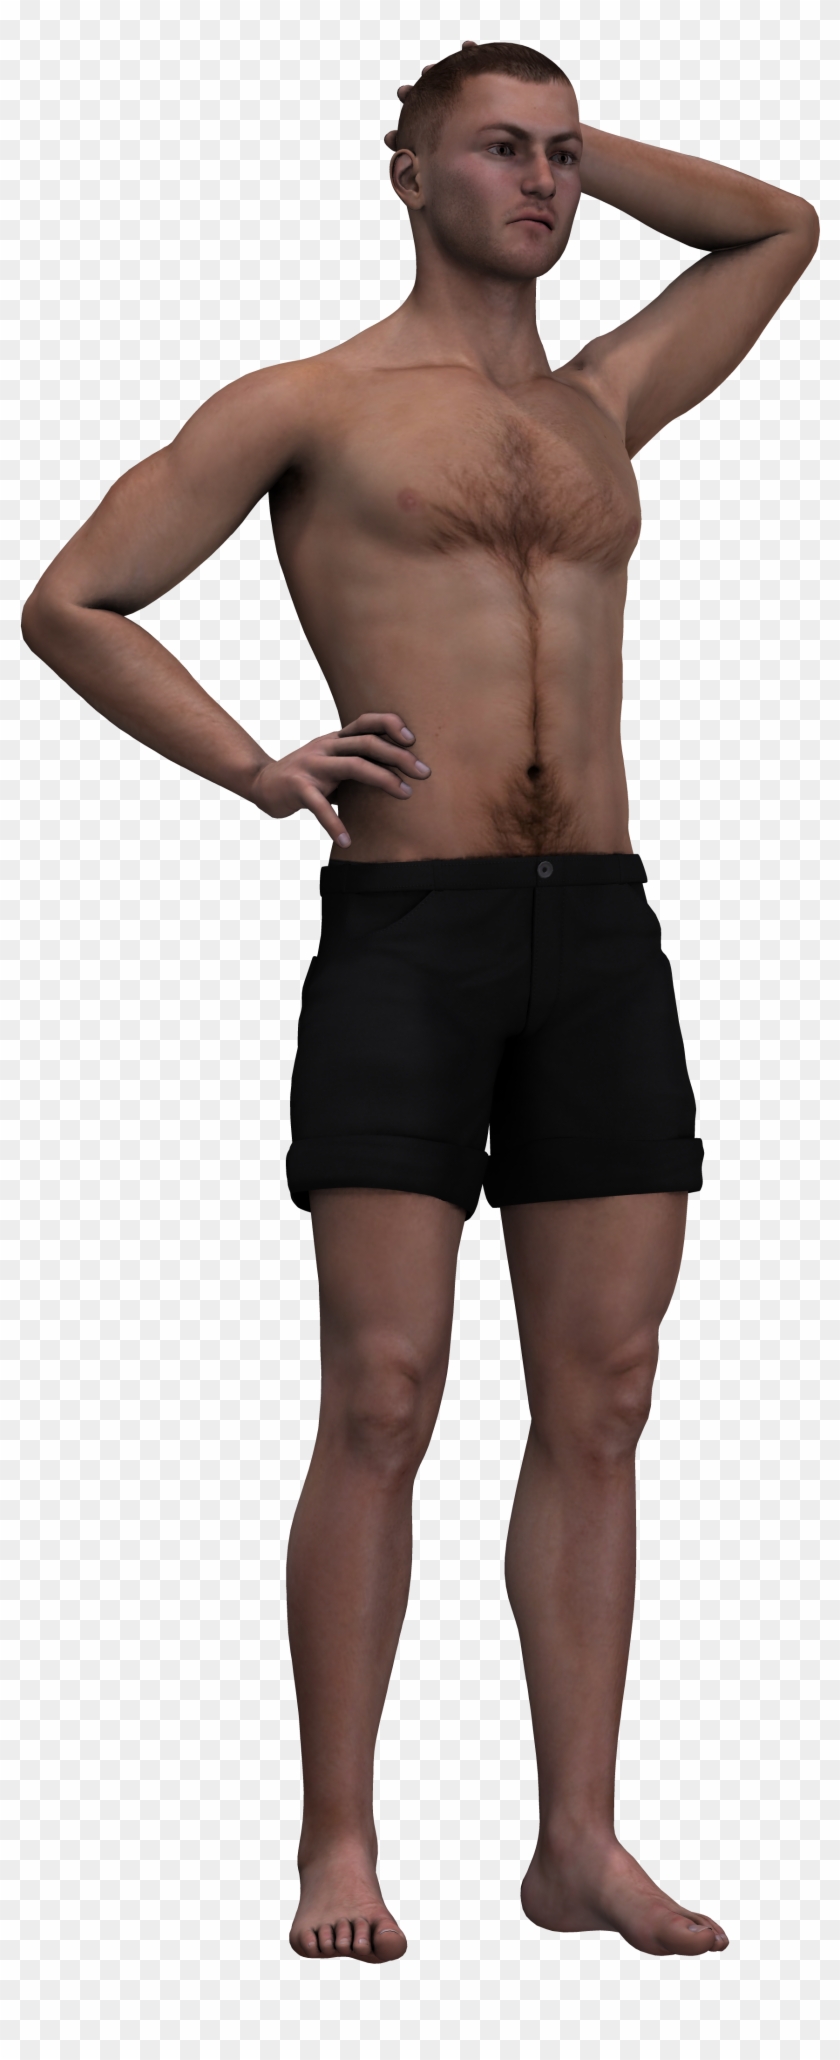 Man In Shorts And With A Naked Torso - Person Standing Clipart #2602483